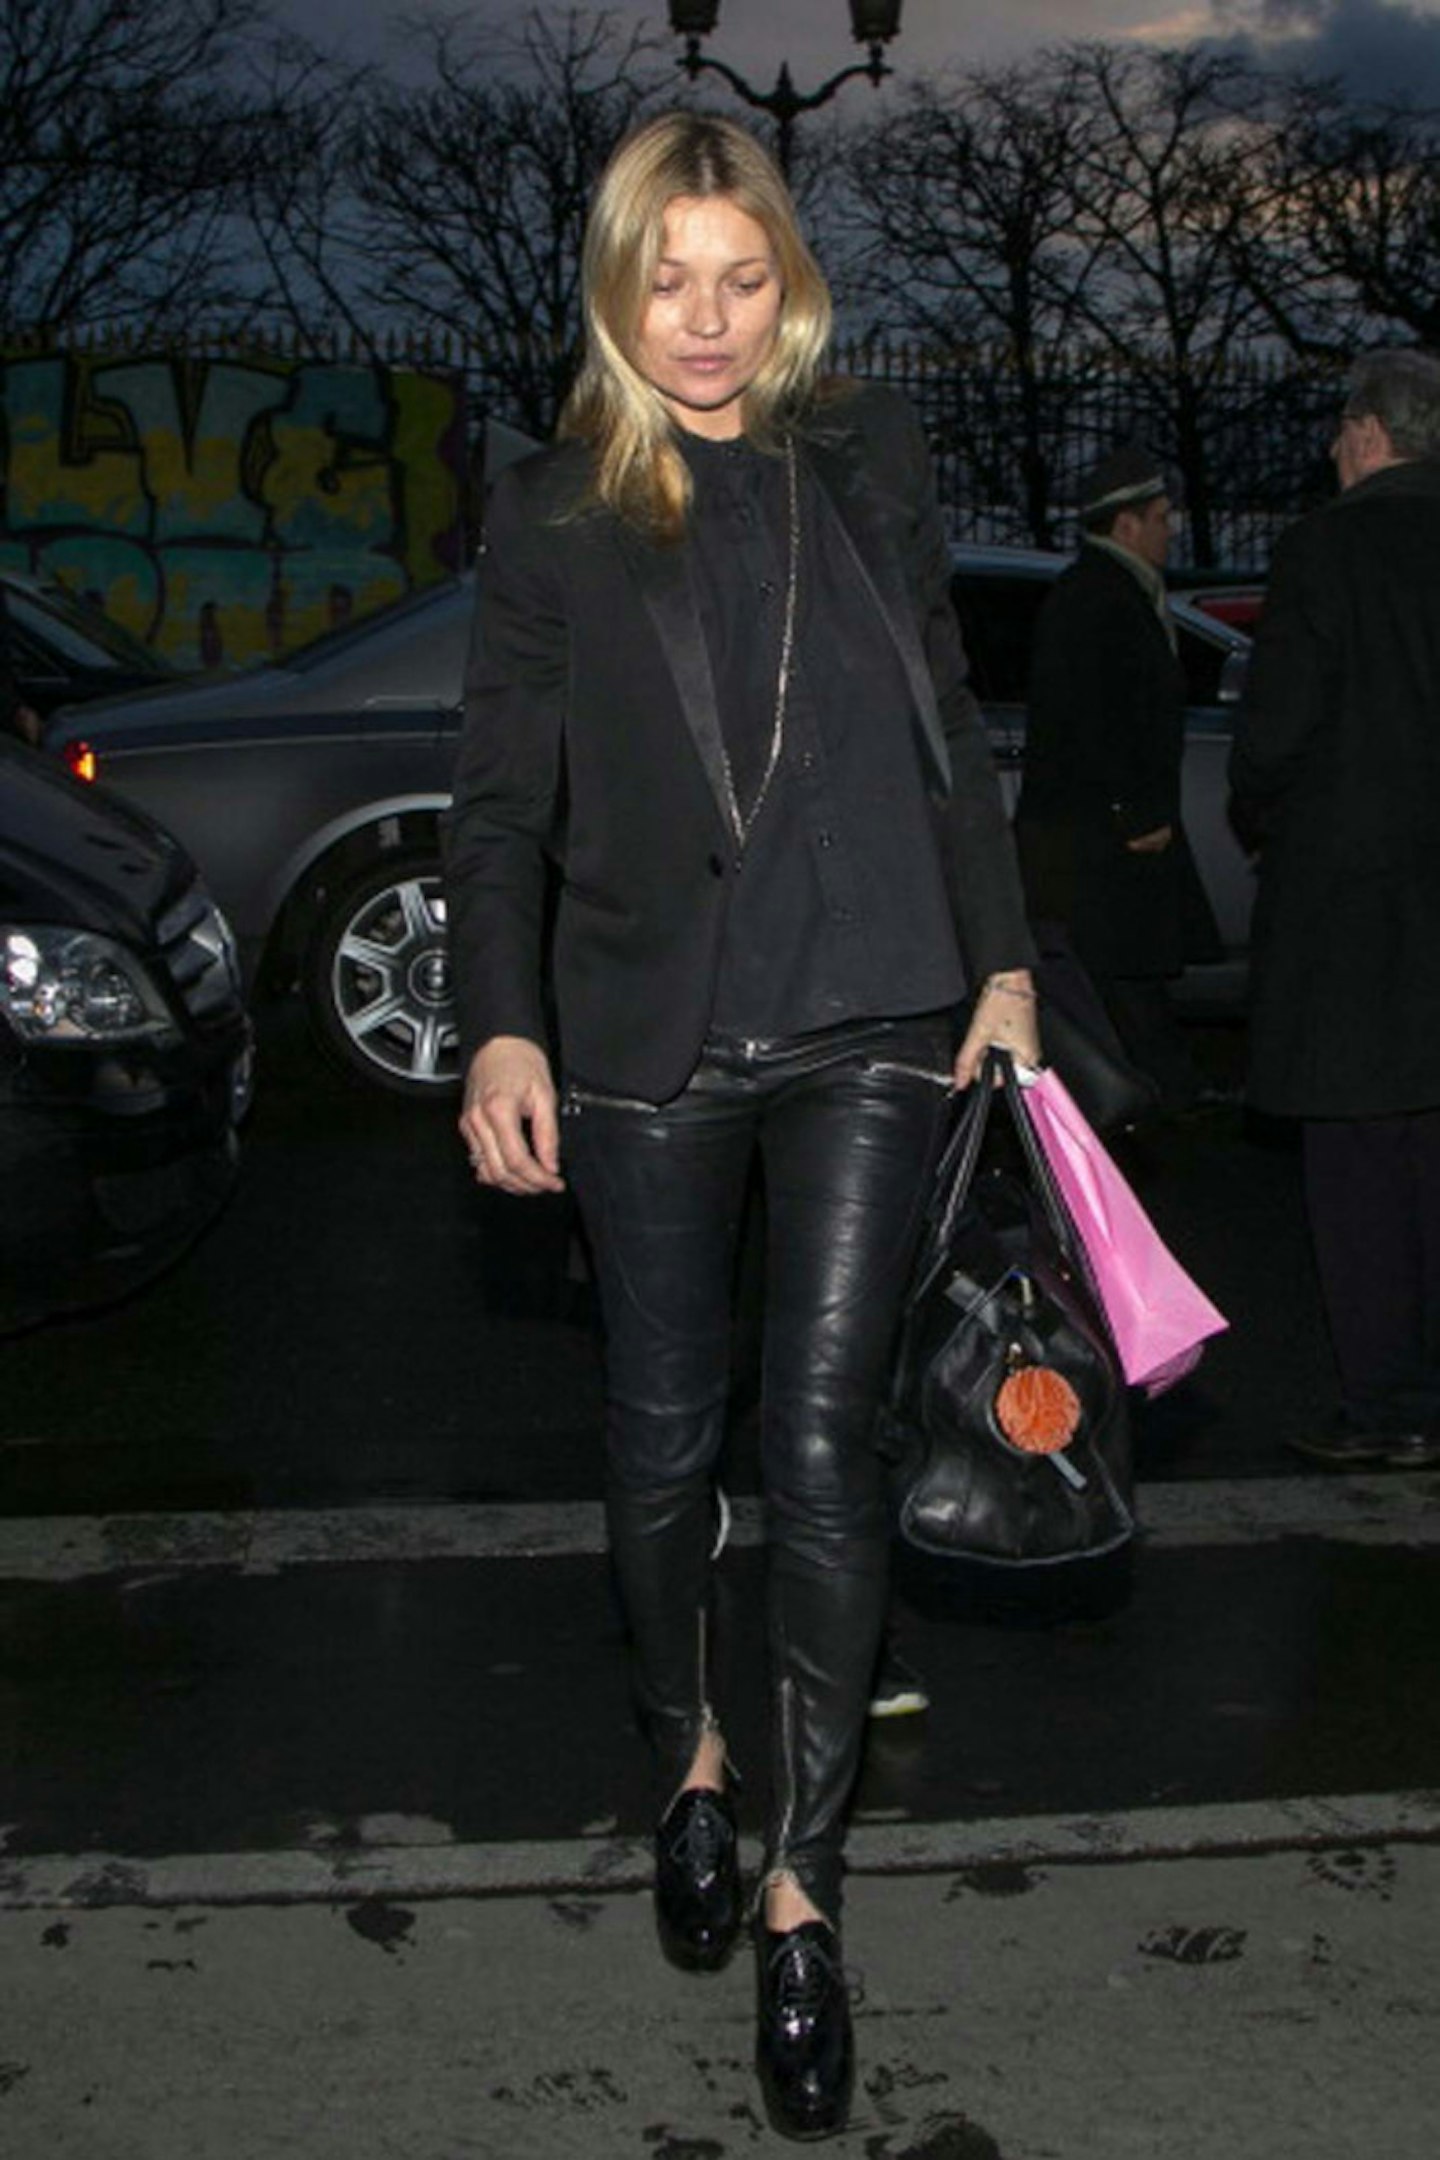 Kate Moss arrives at the 'Meurice' hotel, 3 March 2014